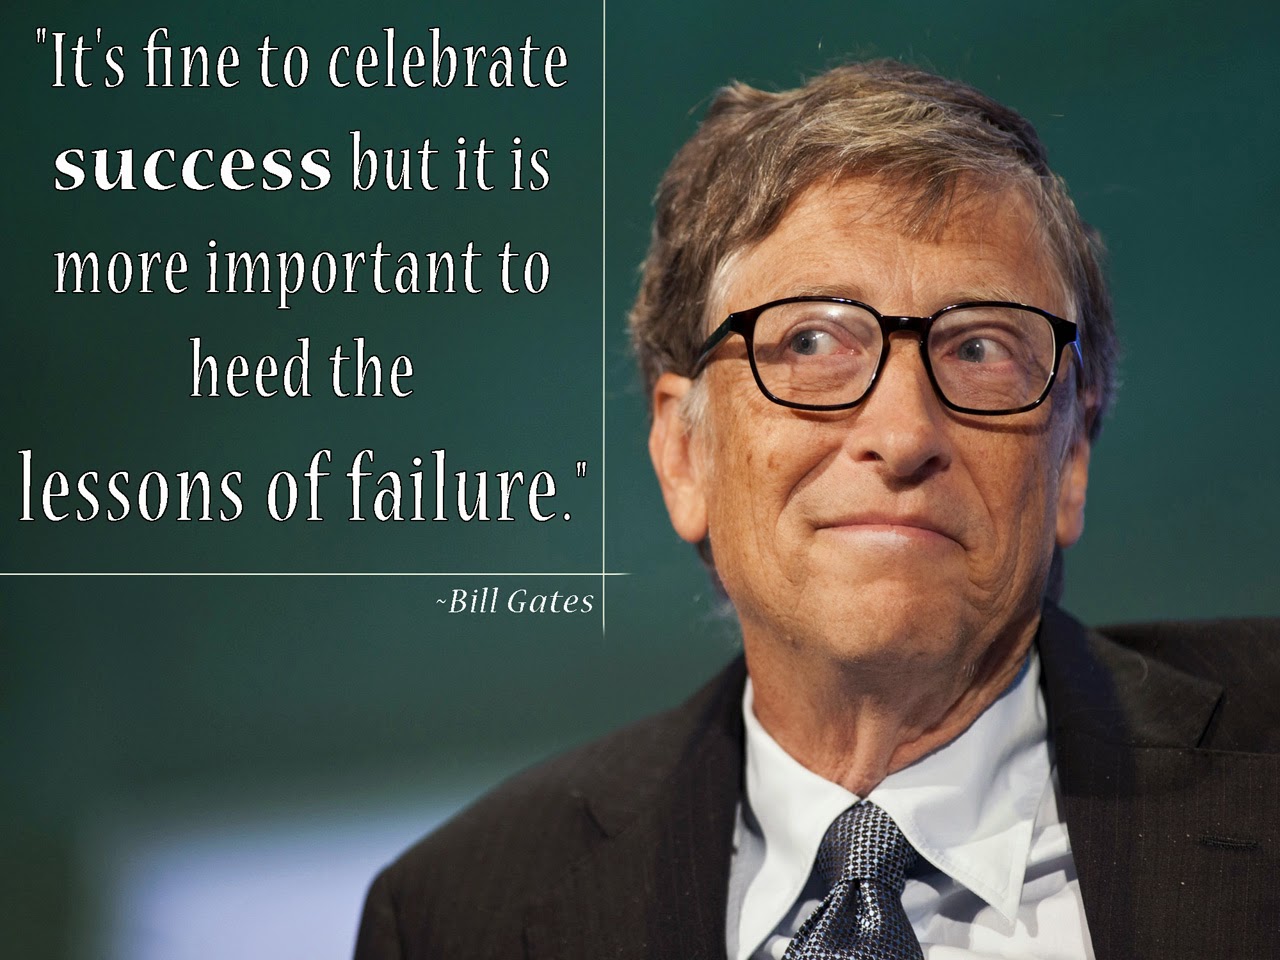 Famous Failure Quotes By World Successful Men - Poetry Likers